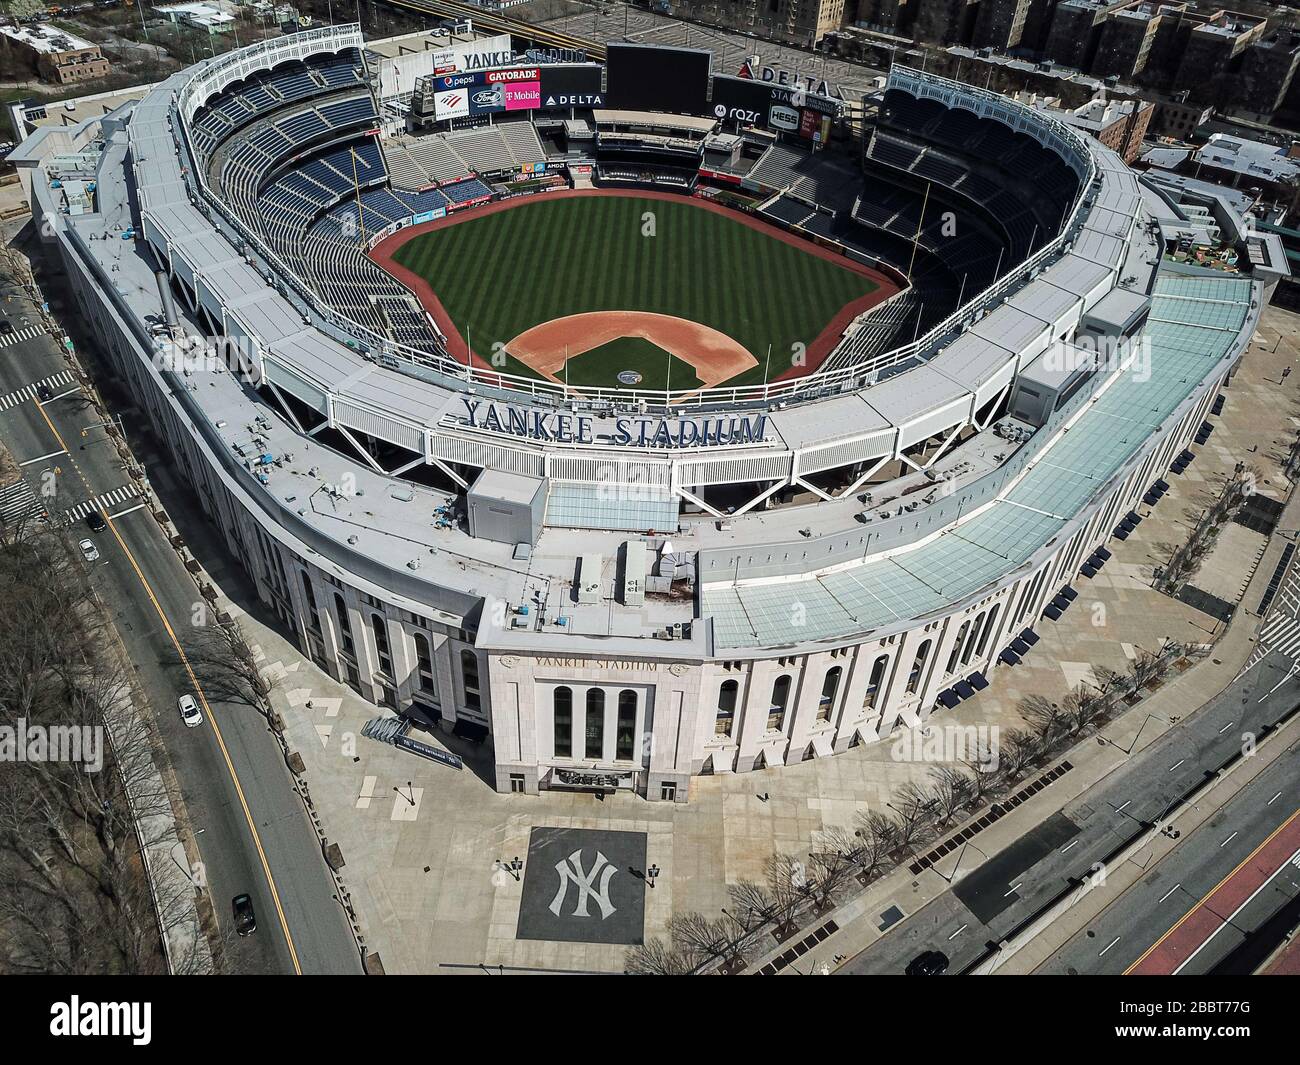 New York, USA. 1st Apr, 2020. April 1, 2020, Bronx, New York City, New York USA: Yankee Stadium totally empty today and for unforeseeable future . MLB (Major League Baseball) season likely to start without fans in quest for most games. Marcus Santos. Credit: Marcus Santos/ZUMA Wire/Alamy Live News Stock Photo